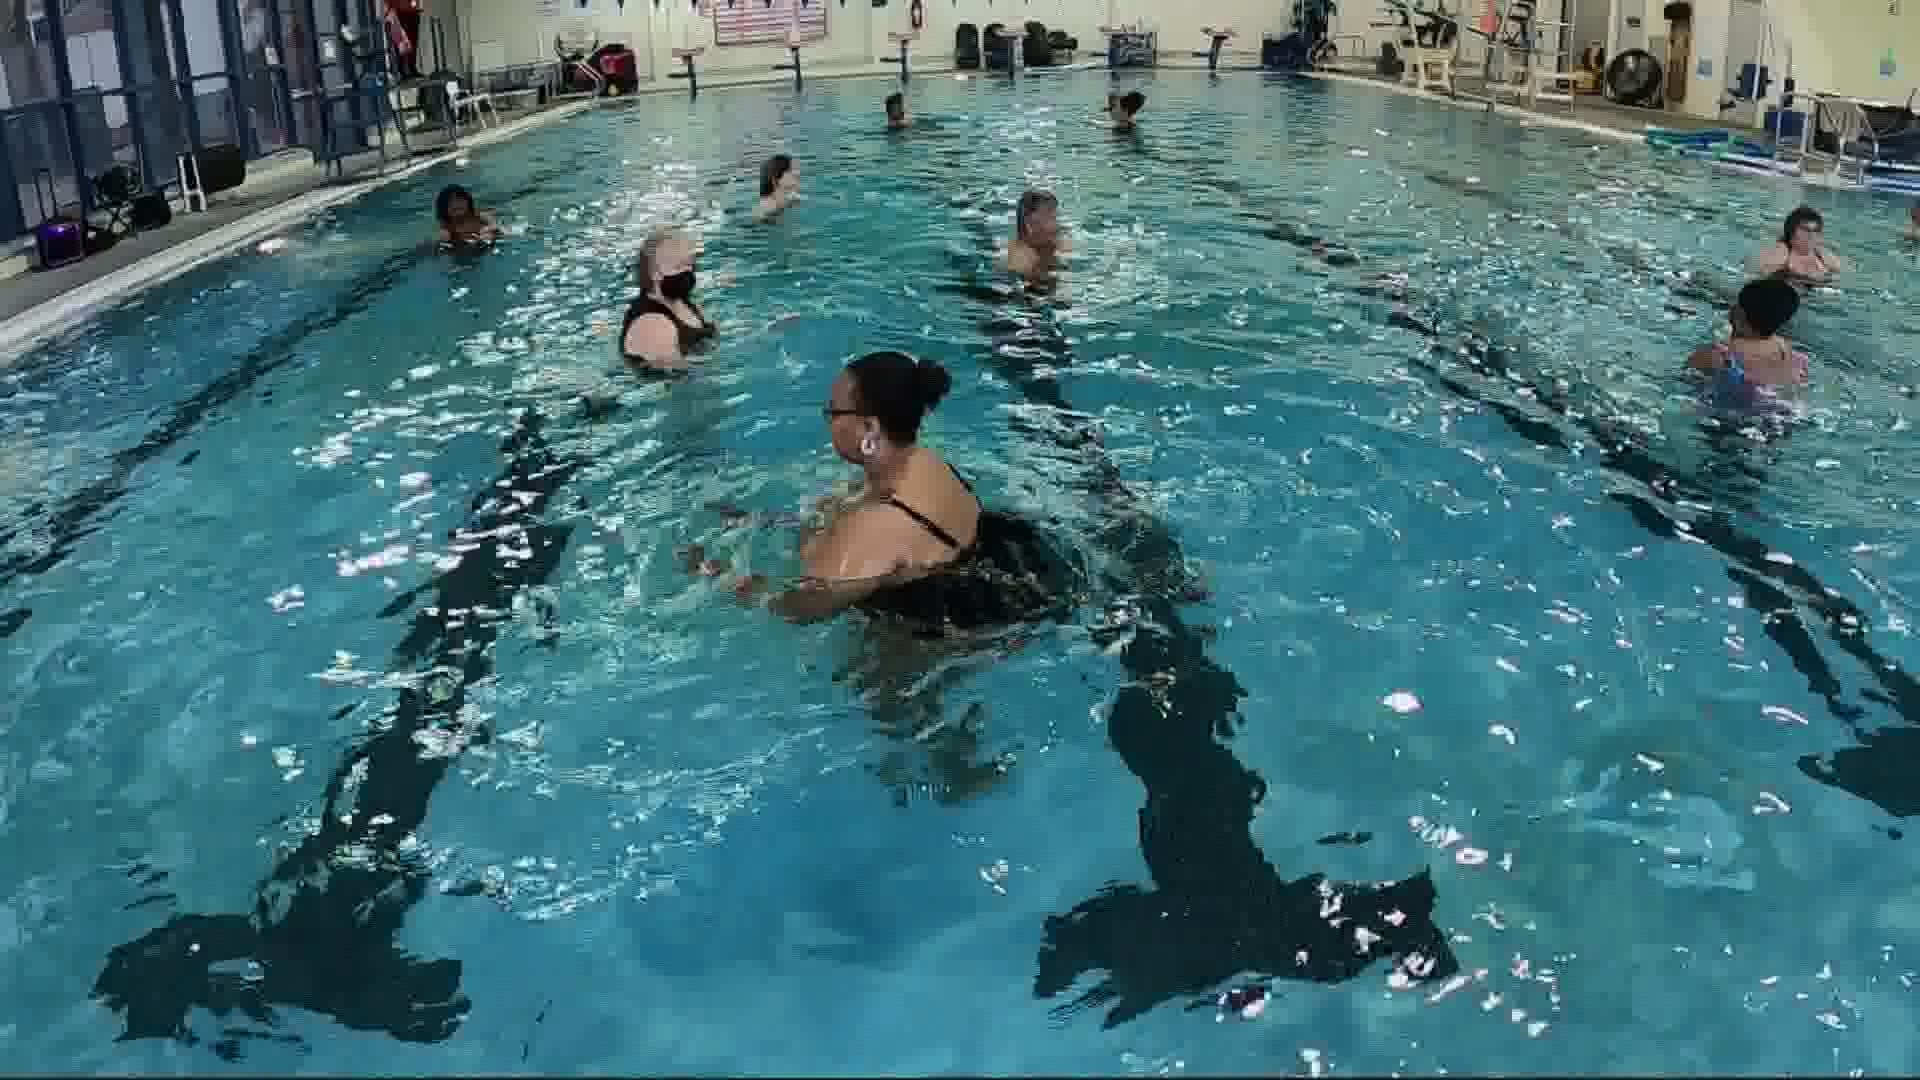 Registration is open for summer swim lessons with Portland Parks and Recreation. KGW Sunrise's Devon Haskins explains how a staff shortage will impact lessons.